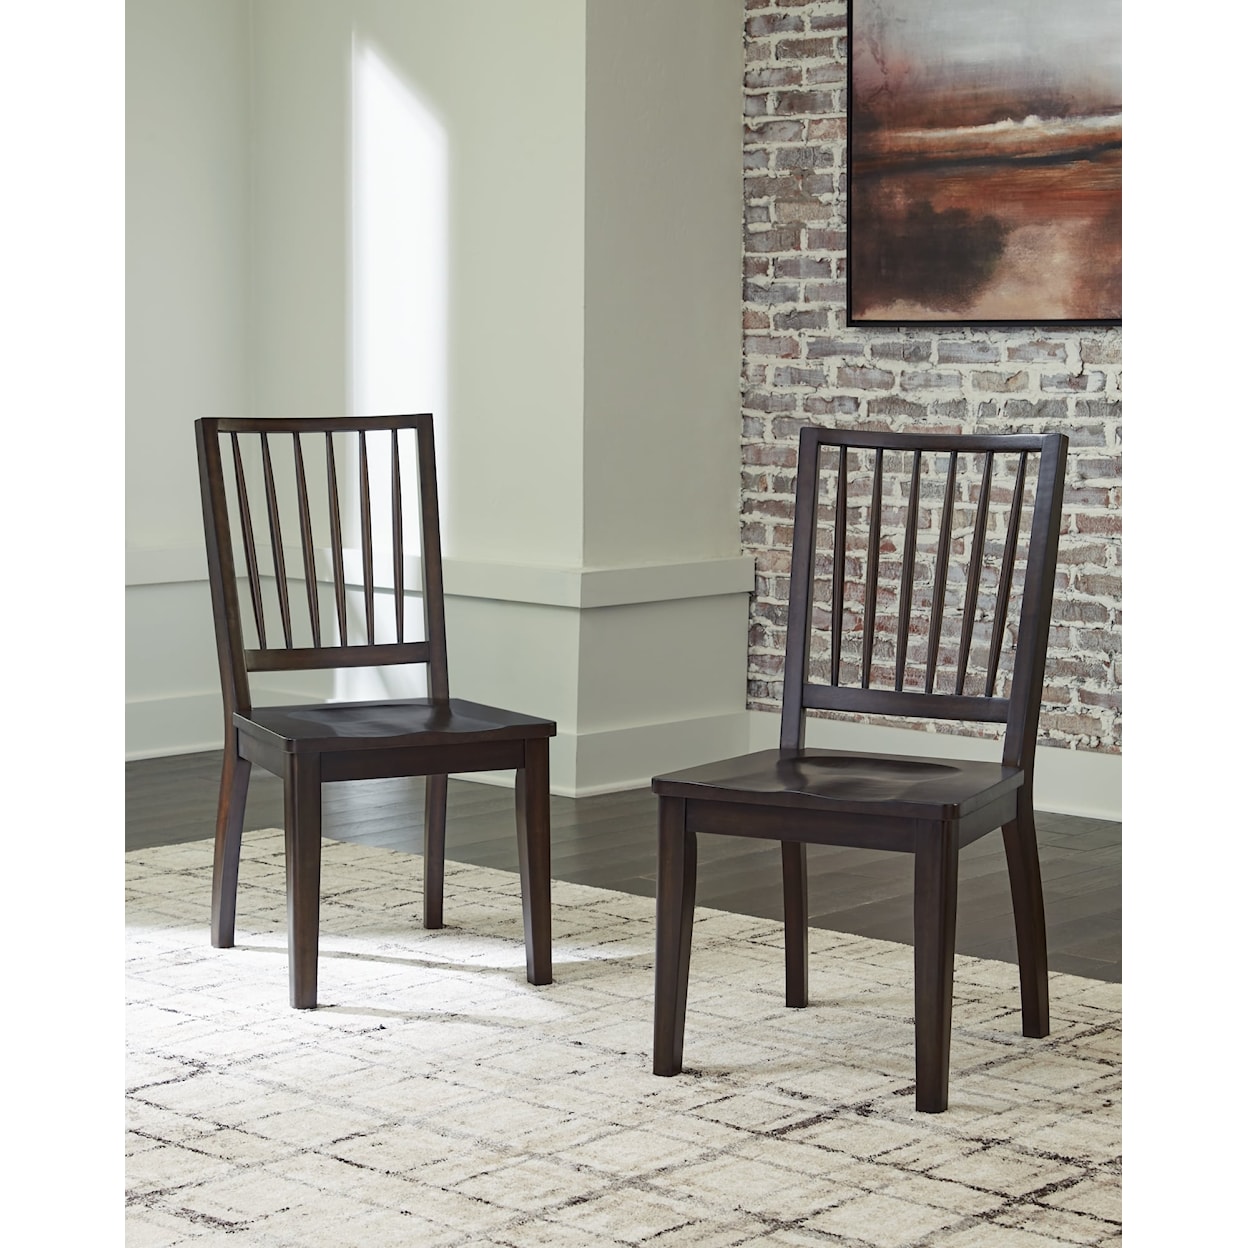 Ashley Furniture Signature Design Charterton Dining Room Side Chair